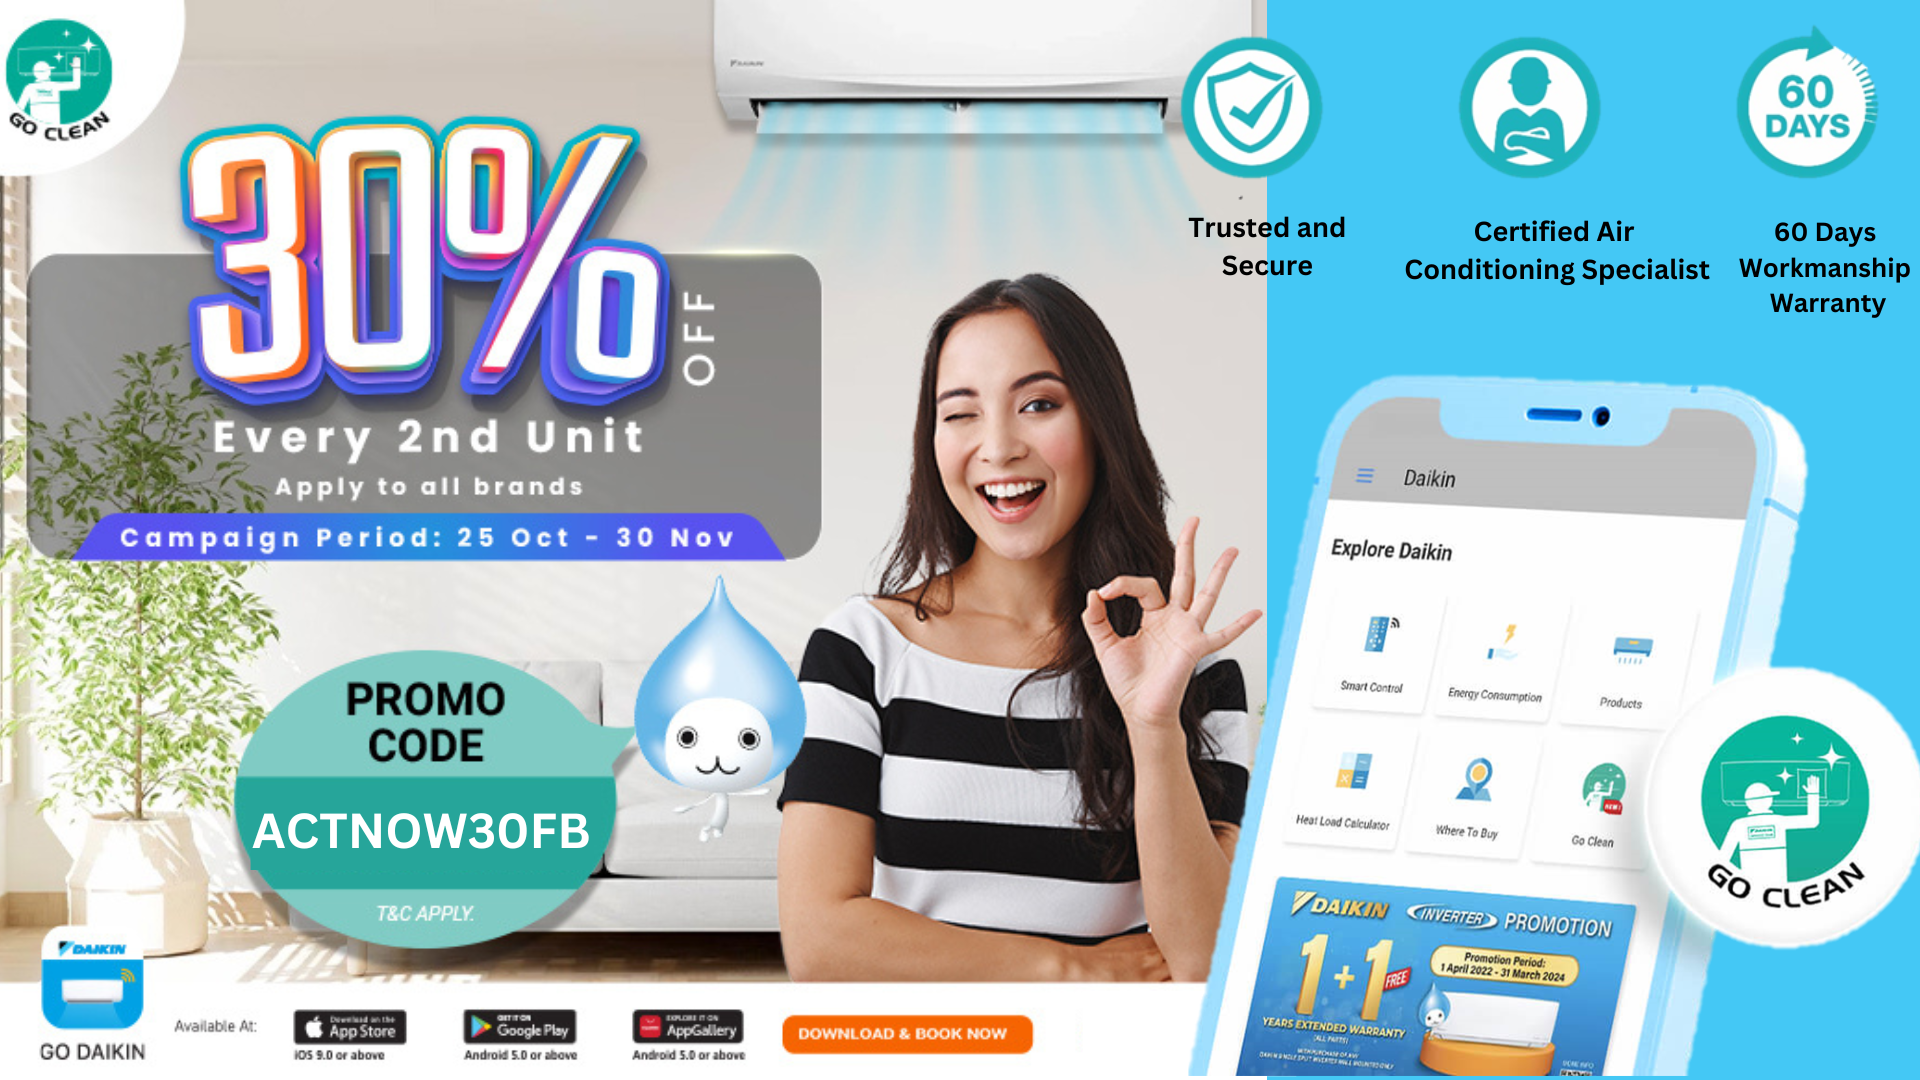 ACTNOW30FB Get 30% Off 2nd Unit For Every 2 Units | Daikin Malaysia